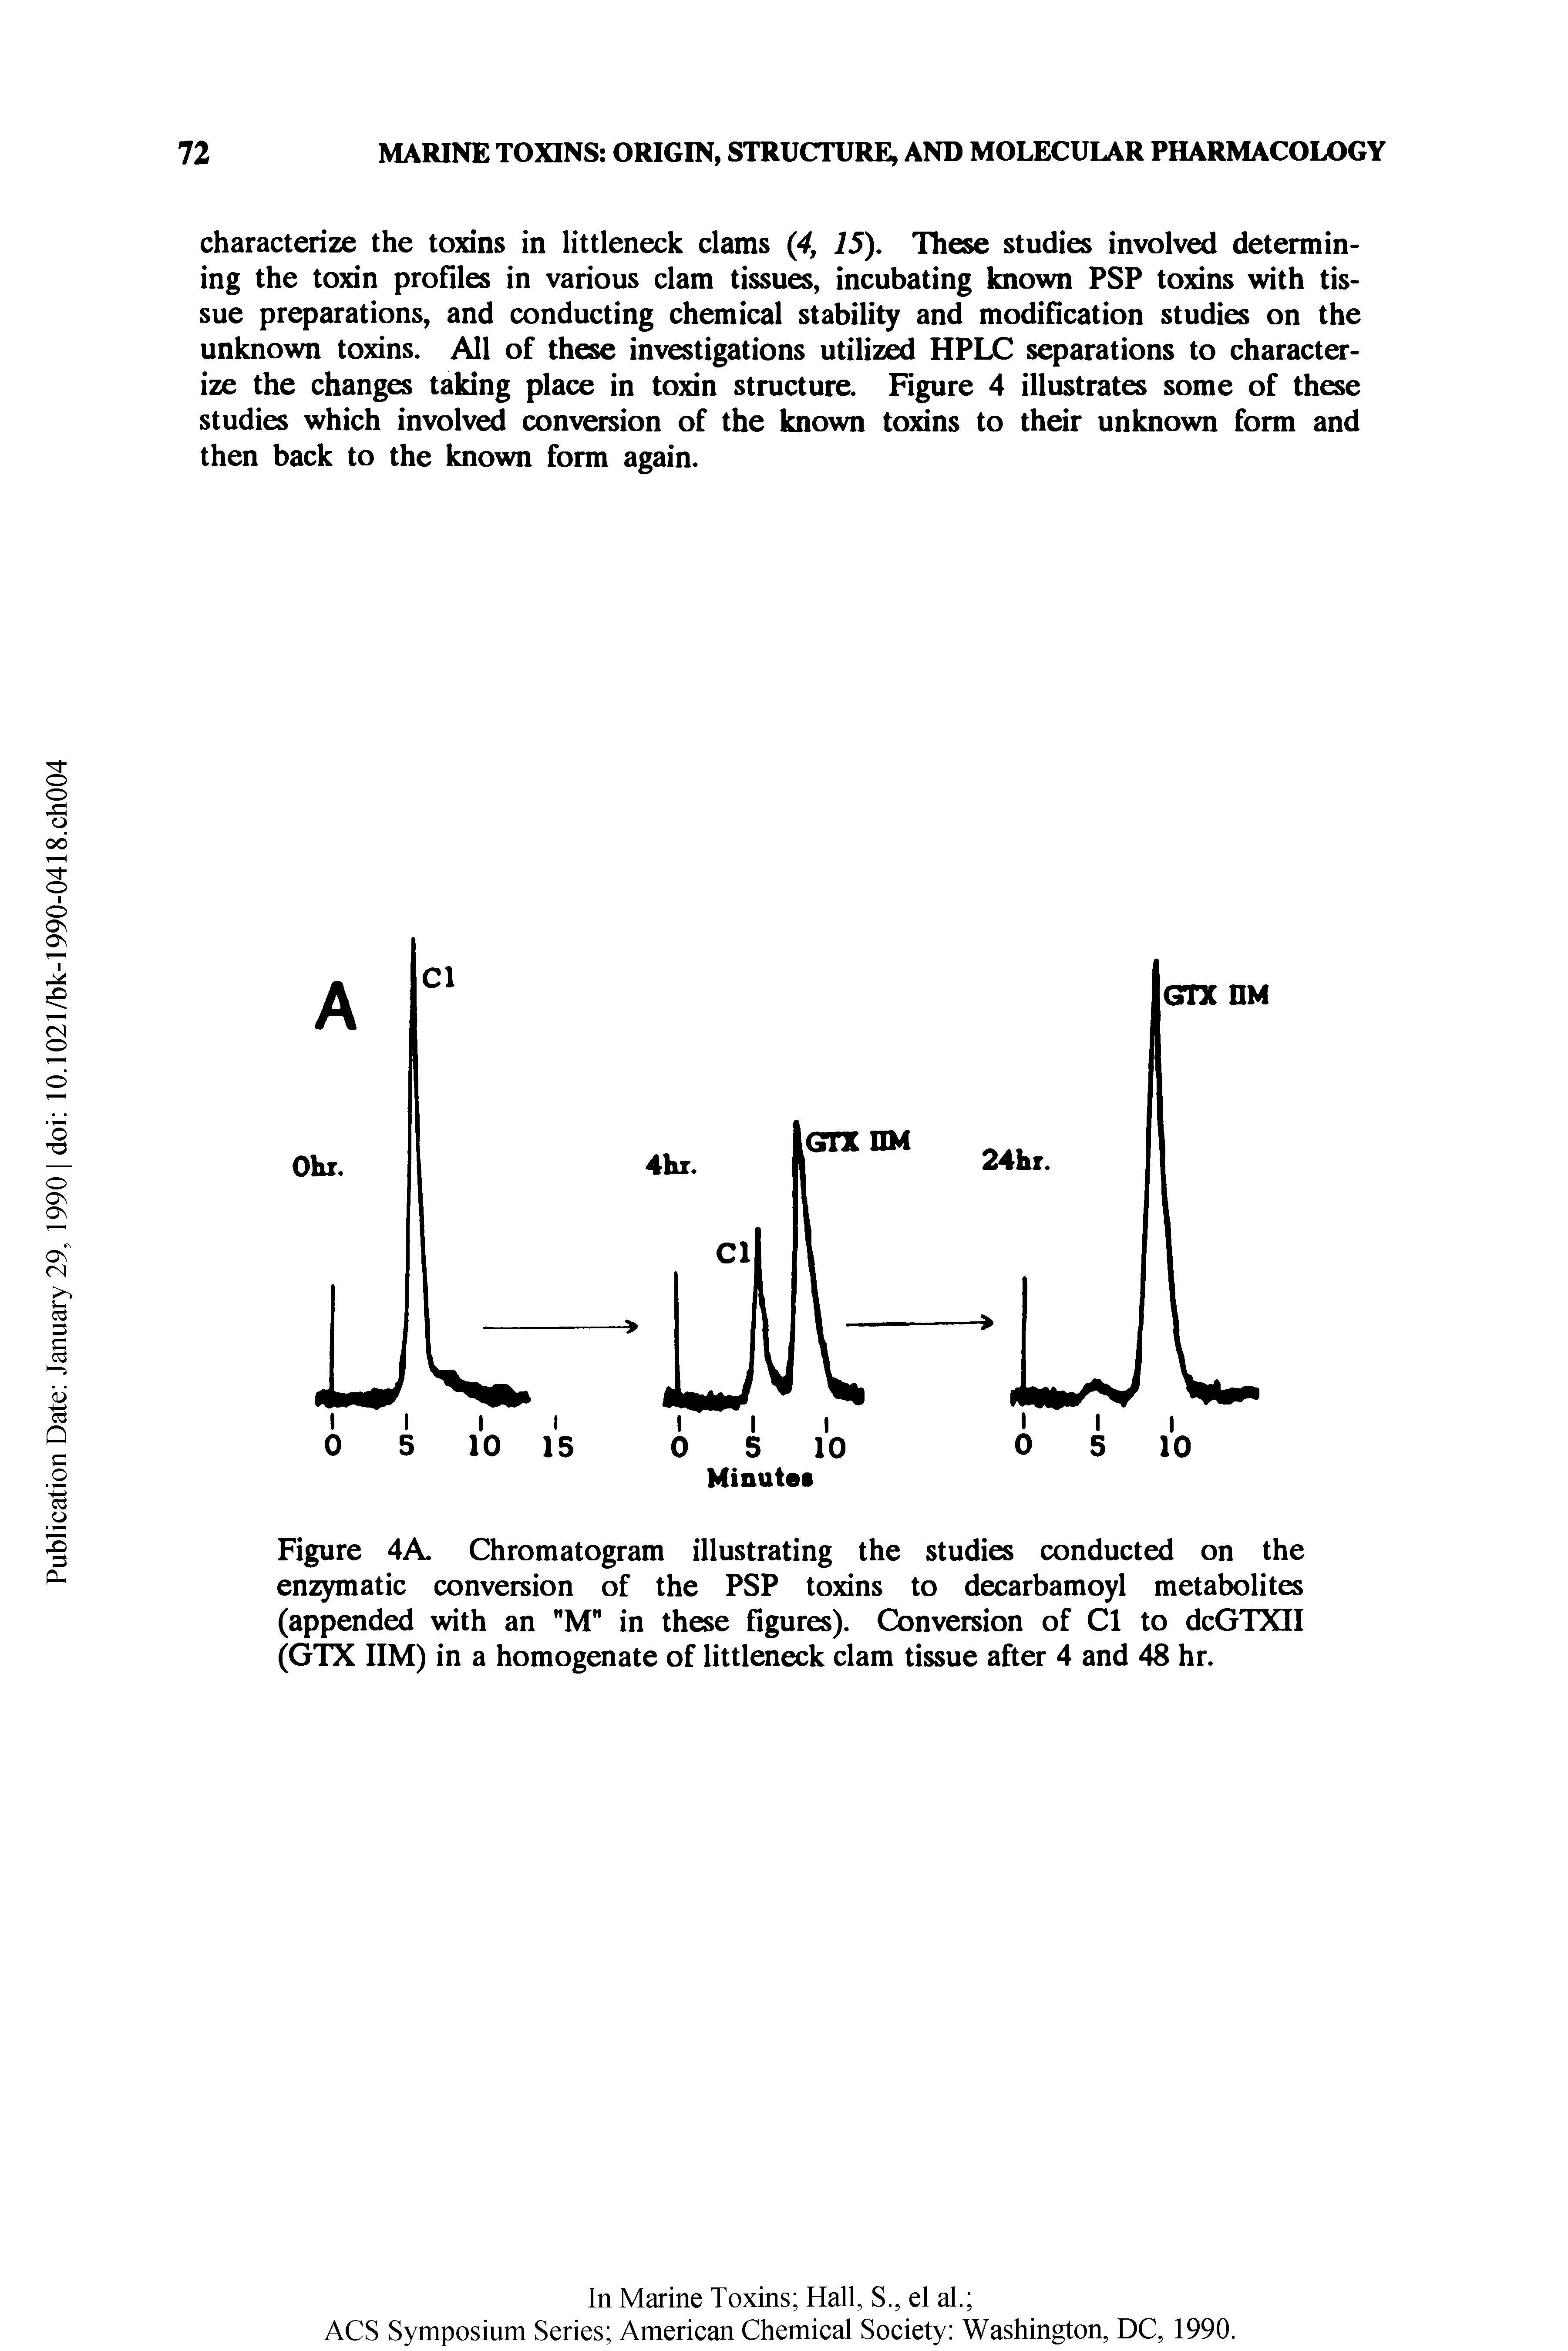 Figure 4A. Chromatogram illustrating the studies conducted on the enzymatic conversion of the PSP toxins to decarbamoyl metabolites (appended with an "M" in these figures). Conversion of Cl to dcGTXII (GTX IIM) in a homogenate of littleneck clam tissue after 4 and 48 hr.